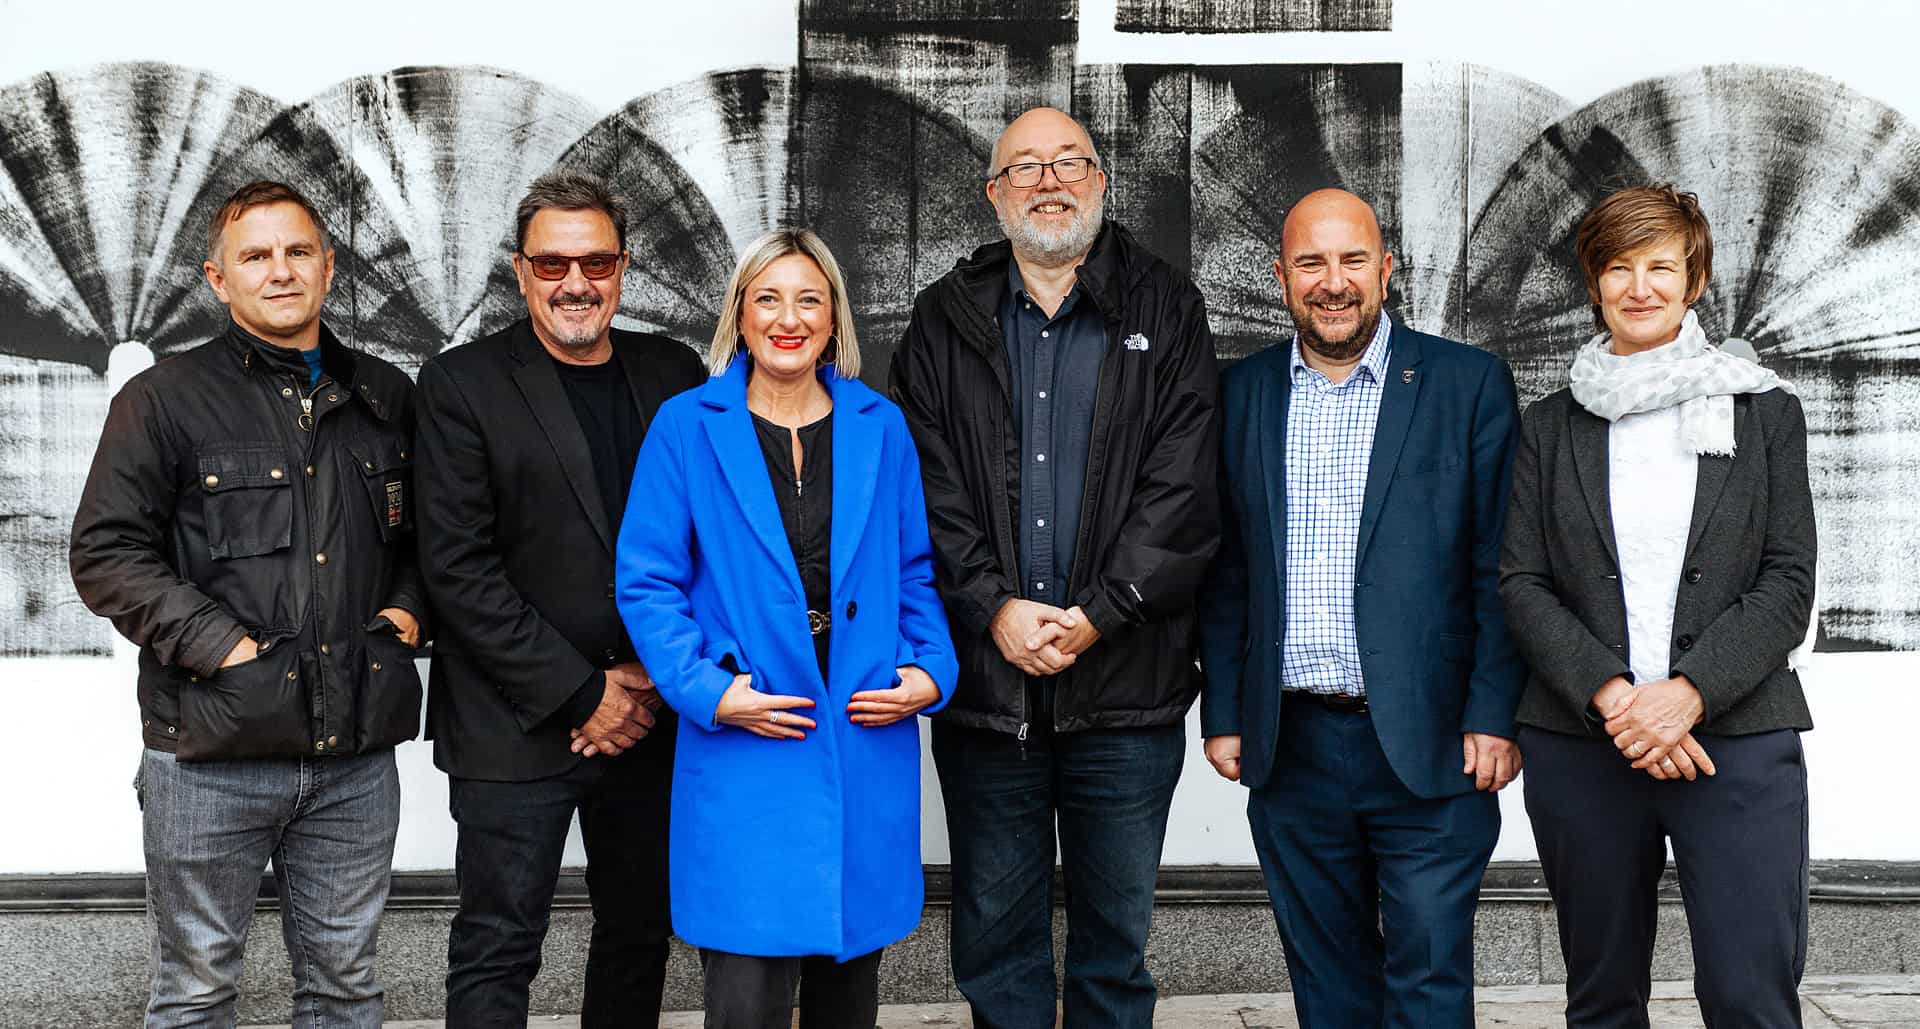 James Ralls (Victorious Festival), Tim Rusby (Chair Portsmouth Creates), Gemma Nicols (CEO Portsmouth Creates), Phil Gibby (ACE), Steve Pitts (leader Portsmouth City Council) and Sarah Duckering (University of Portsmouth) © Joe Watson